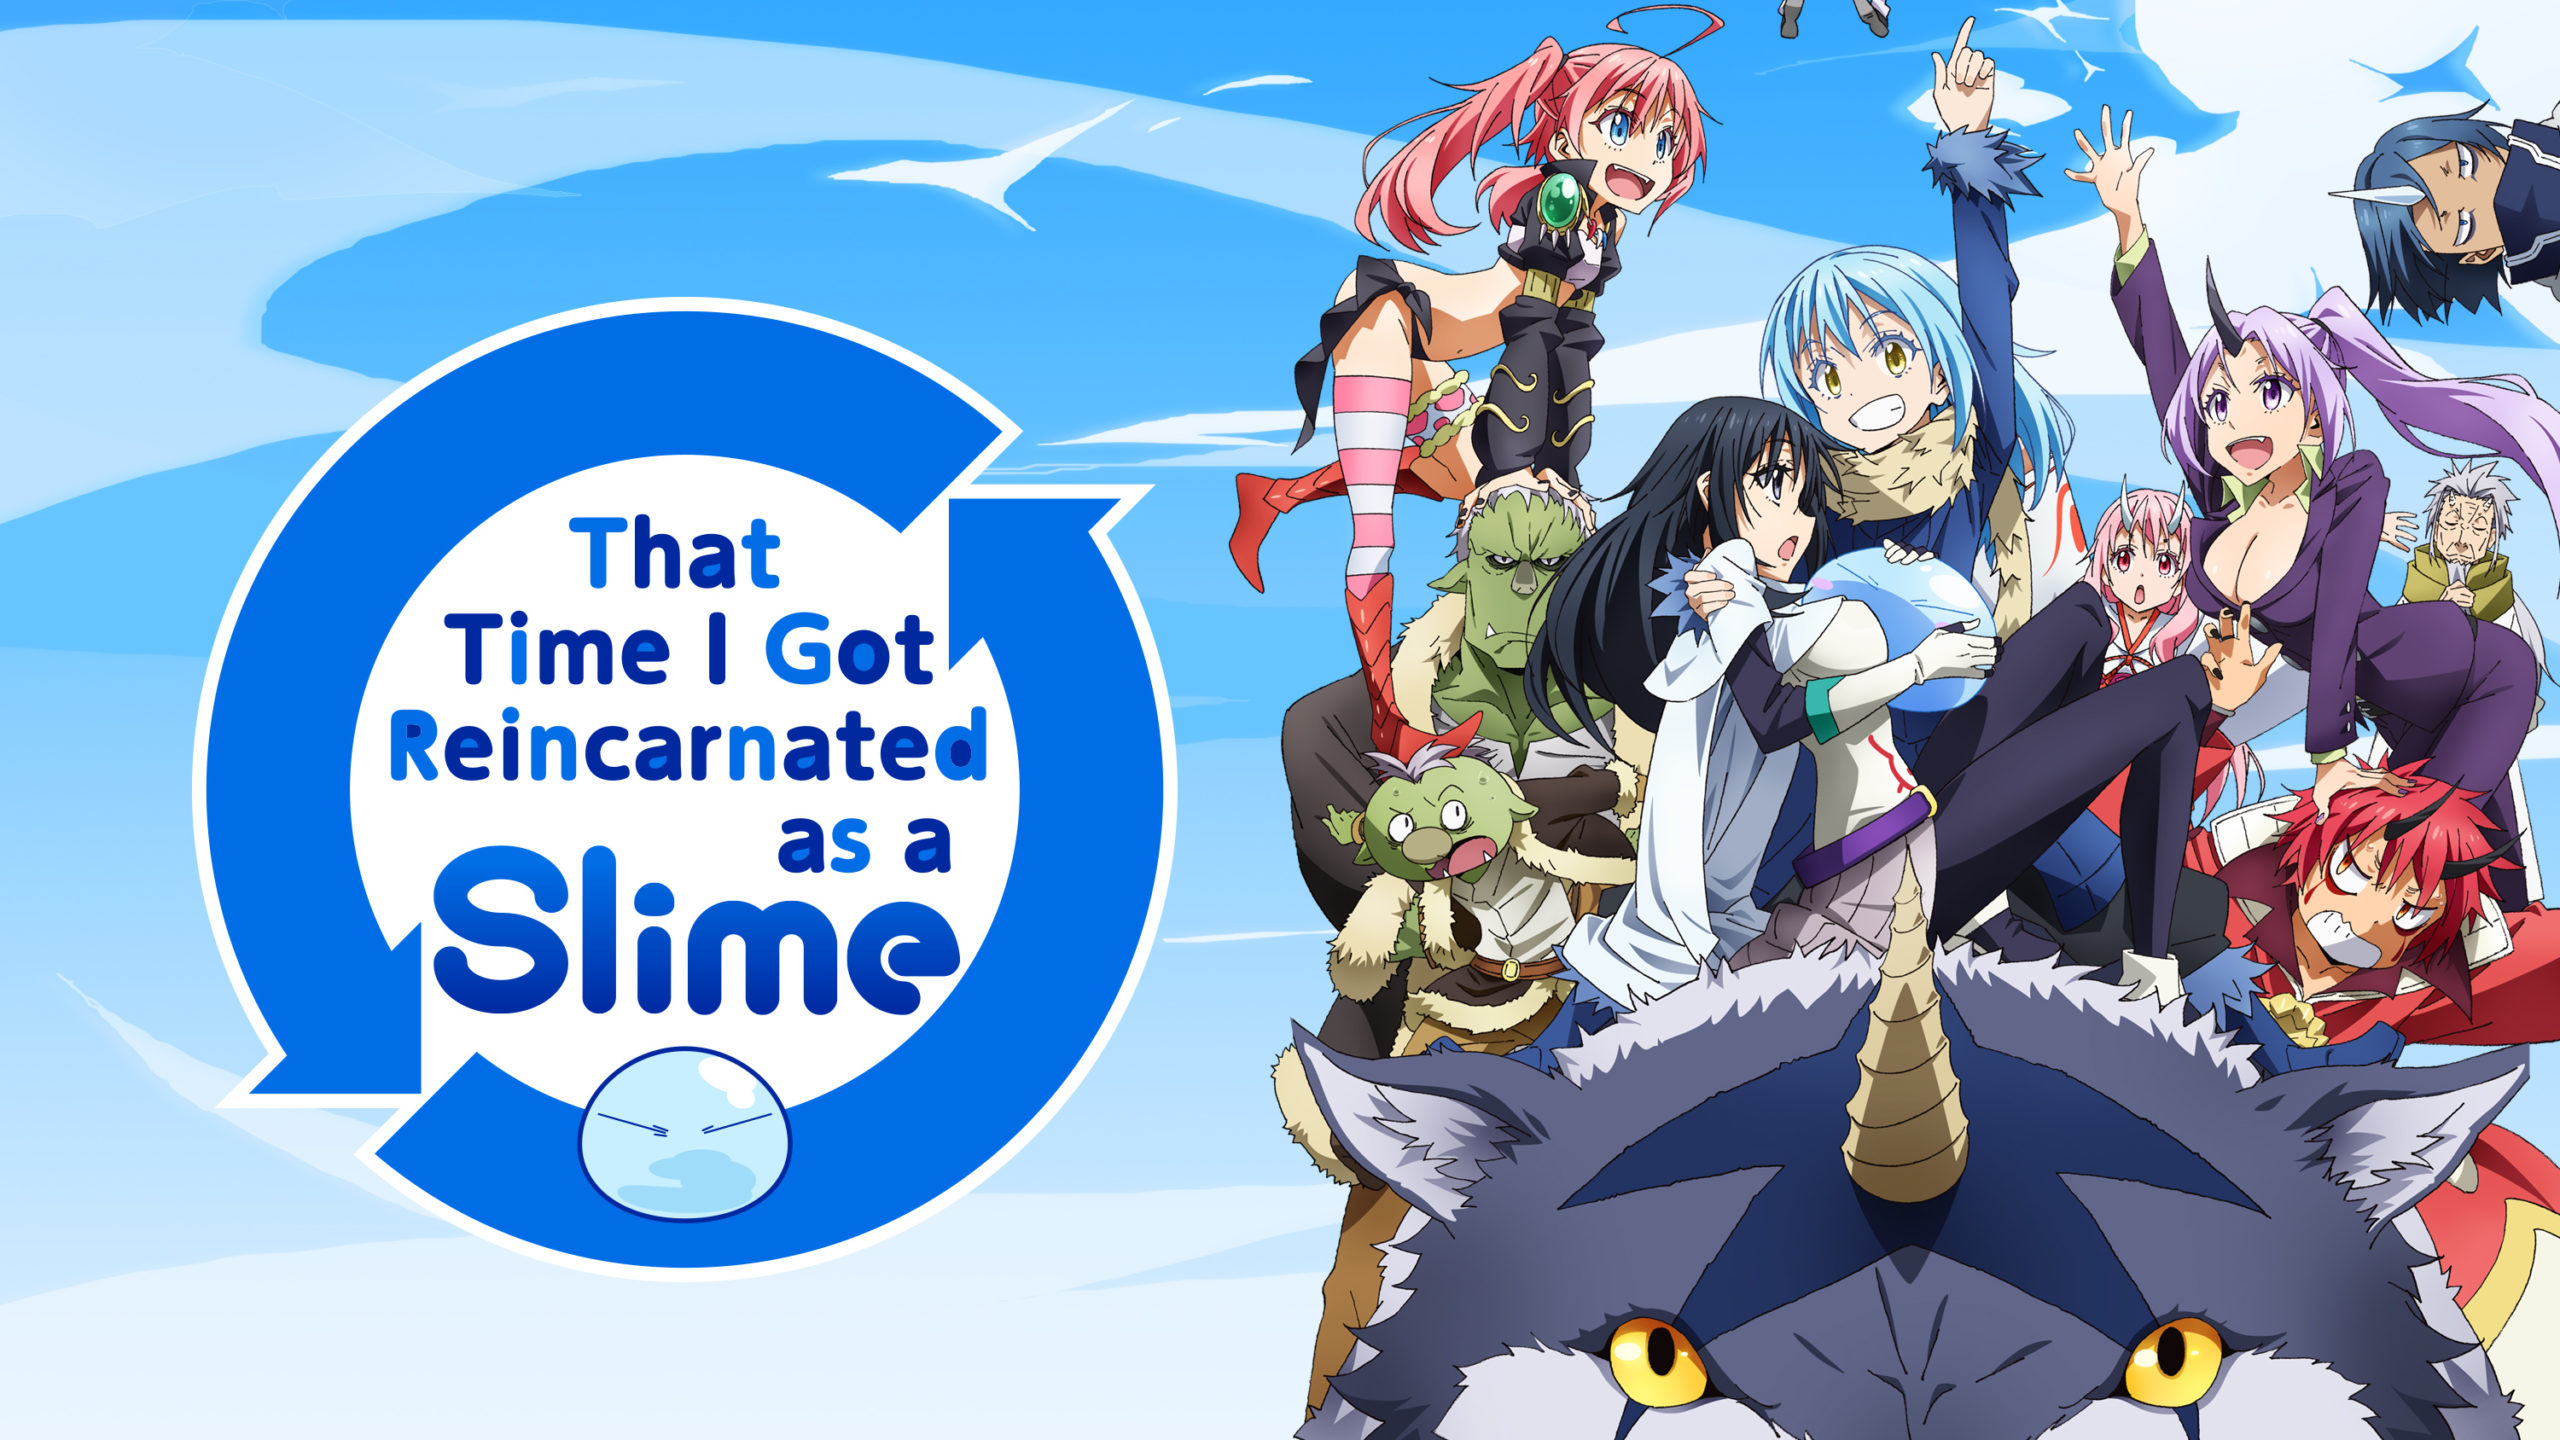 That Time I Got Reincarnated as a Slime Season 2 Episode 2 Release Date, Story & Watch Online